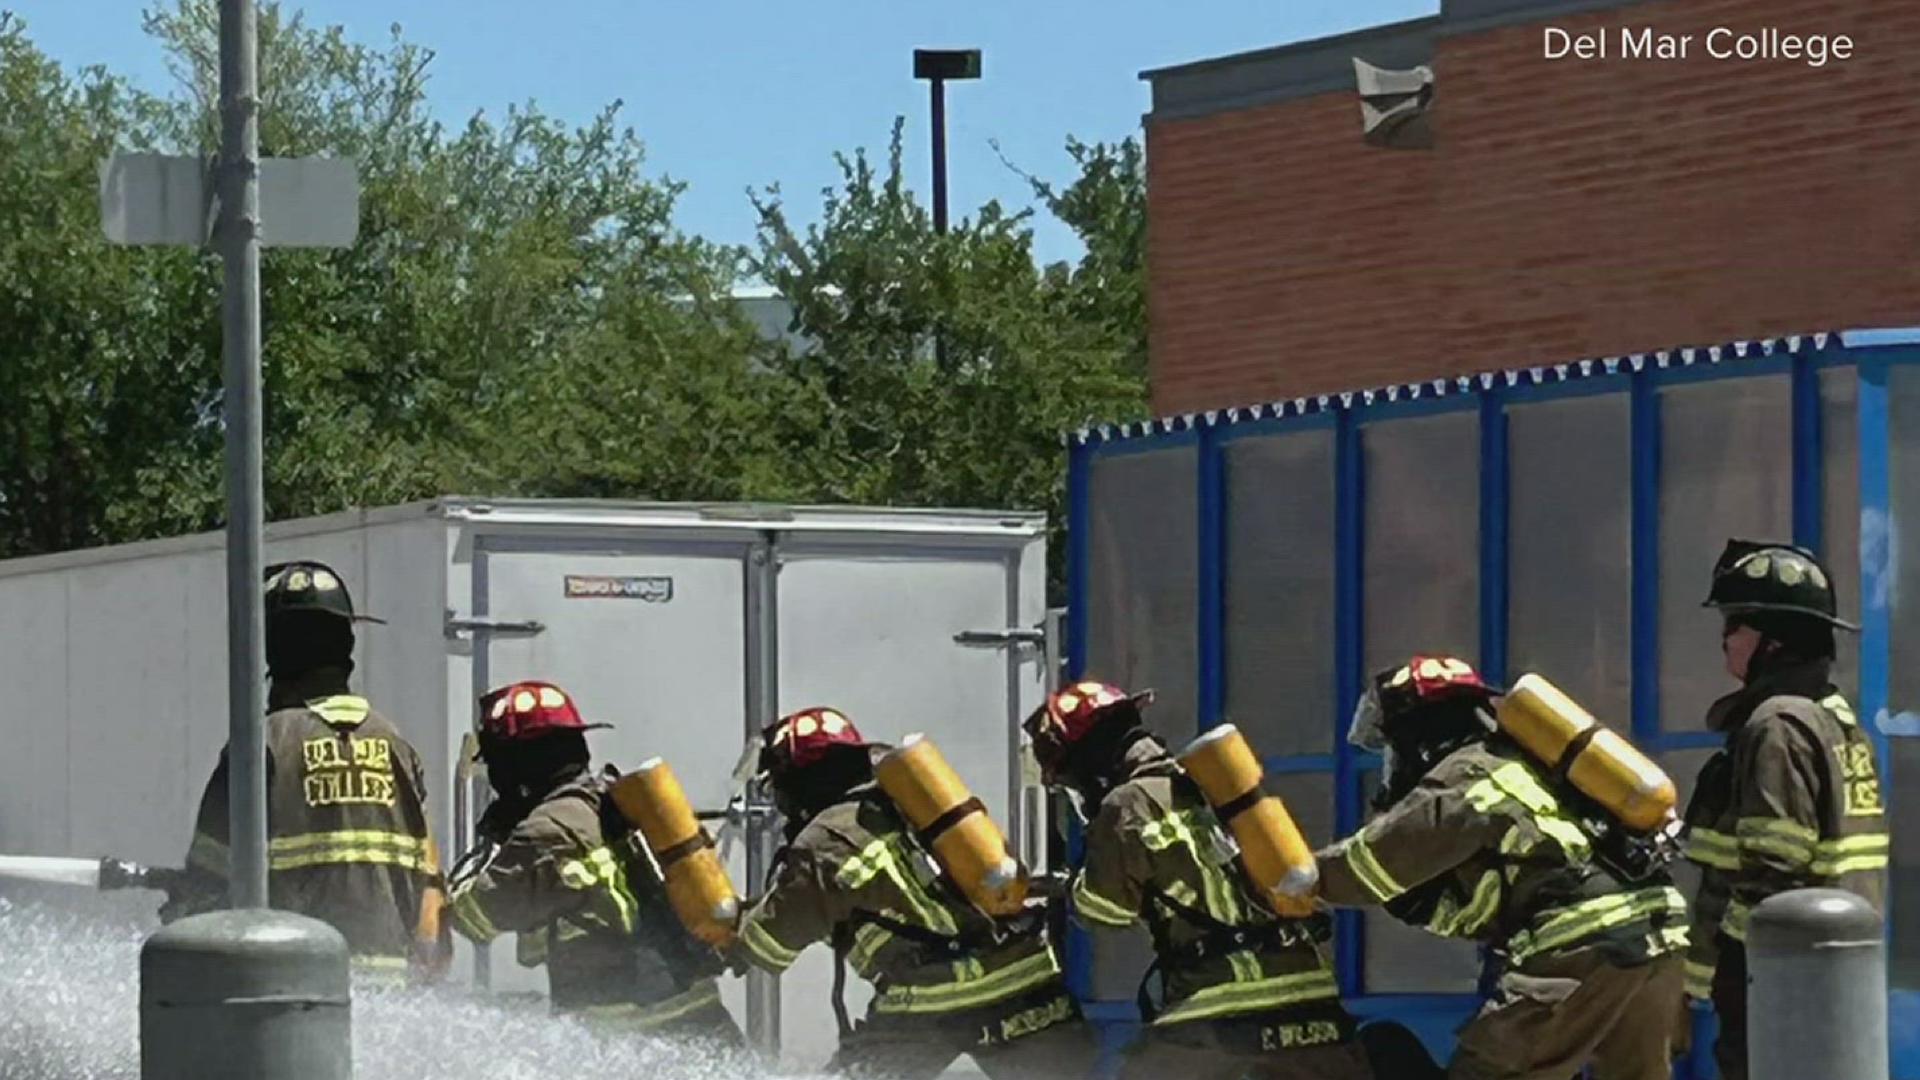 All 29 cadets in the class passed the Basic Structure Fire Examination on their first attempt!